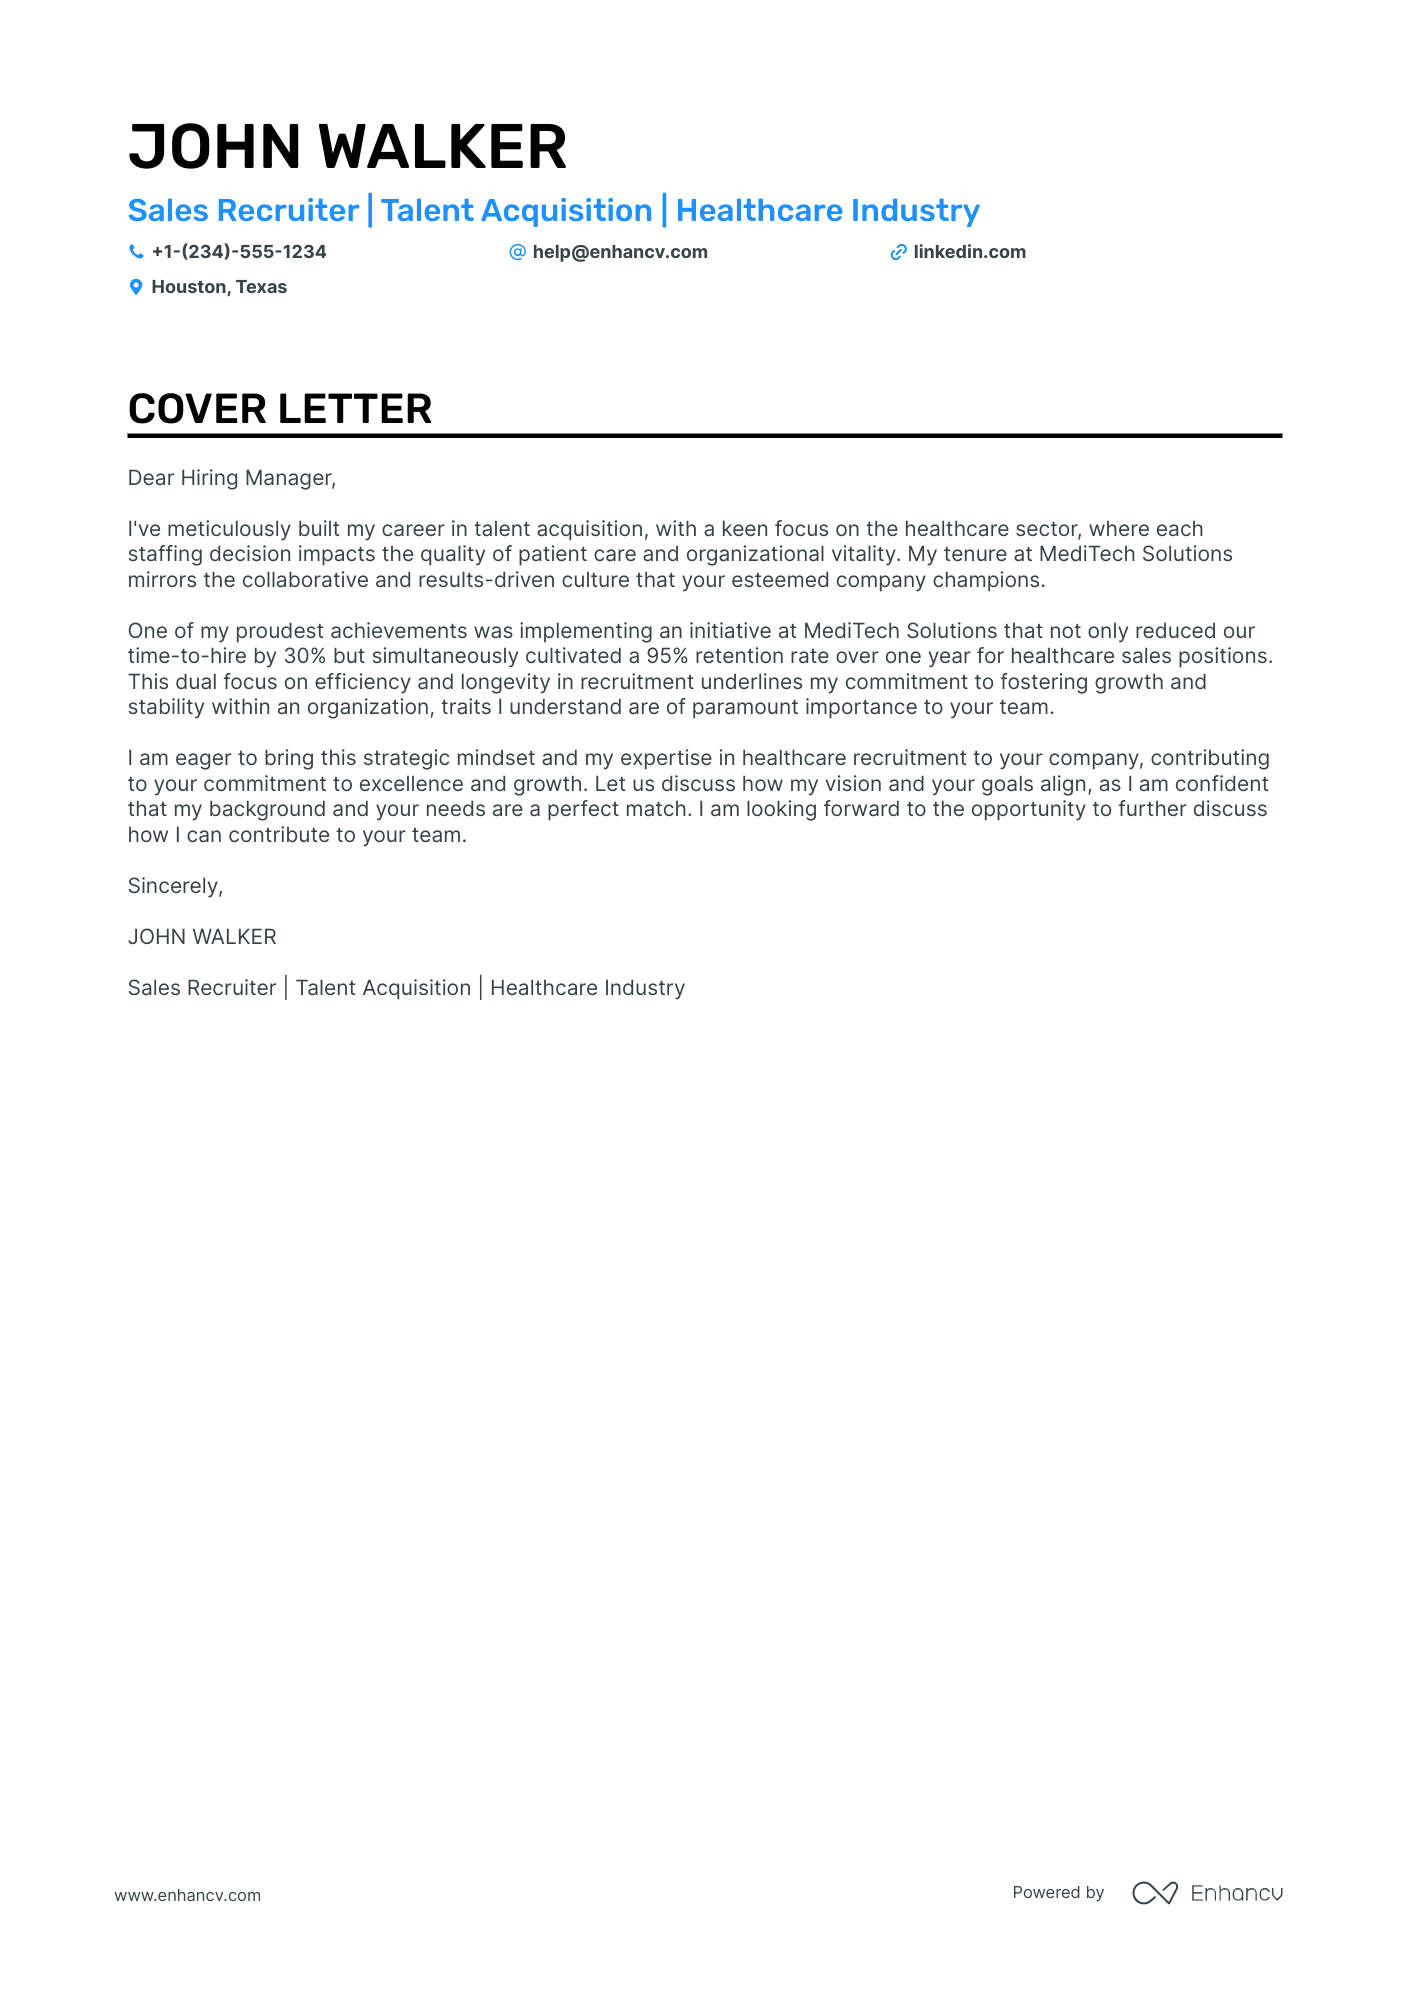 Sales Recruiter cover letter